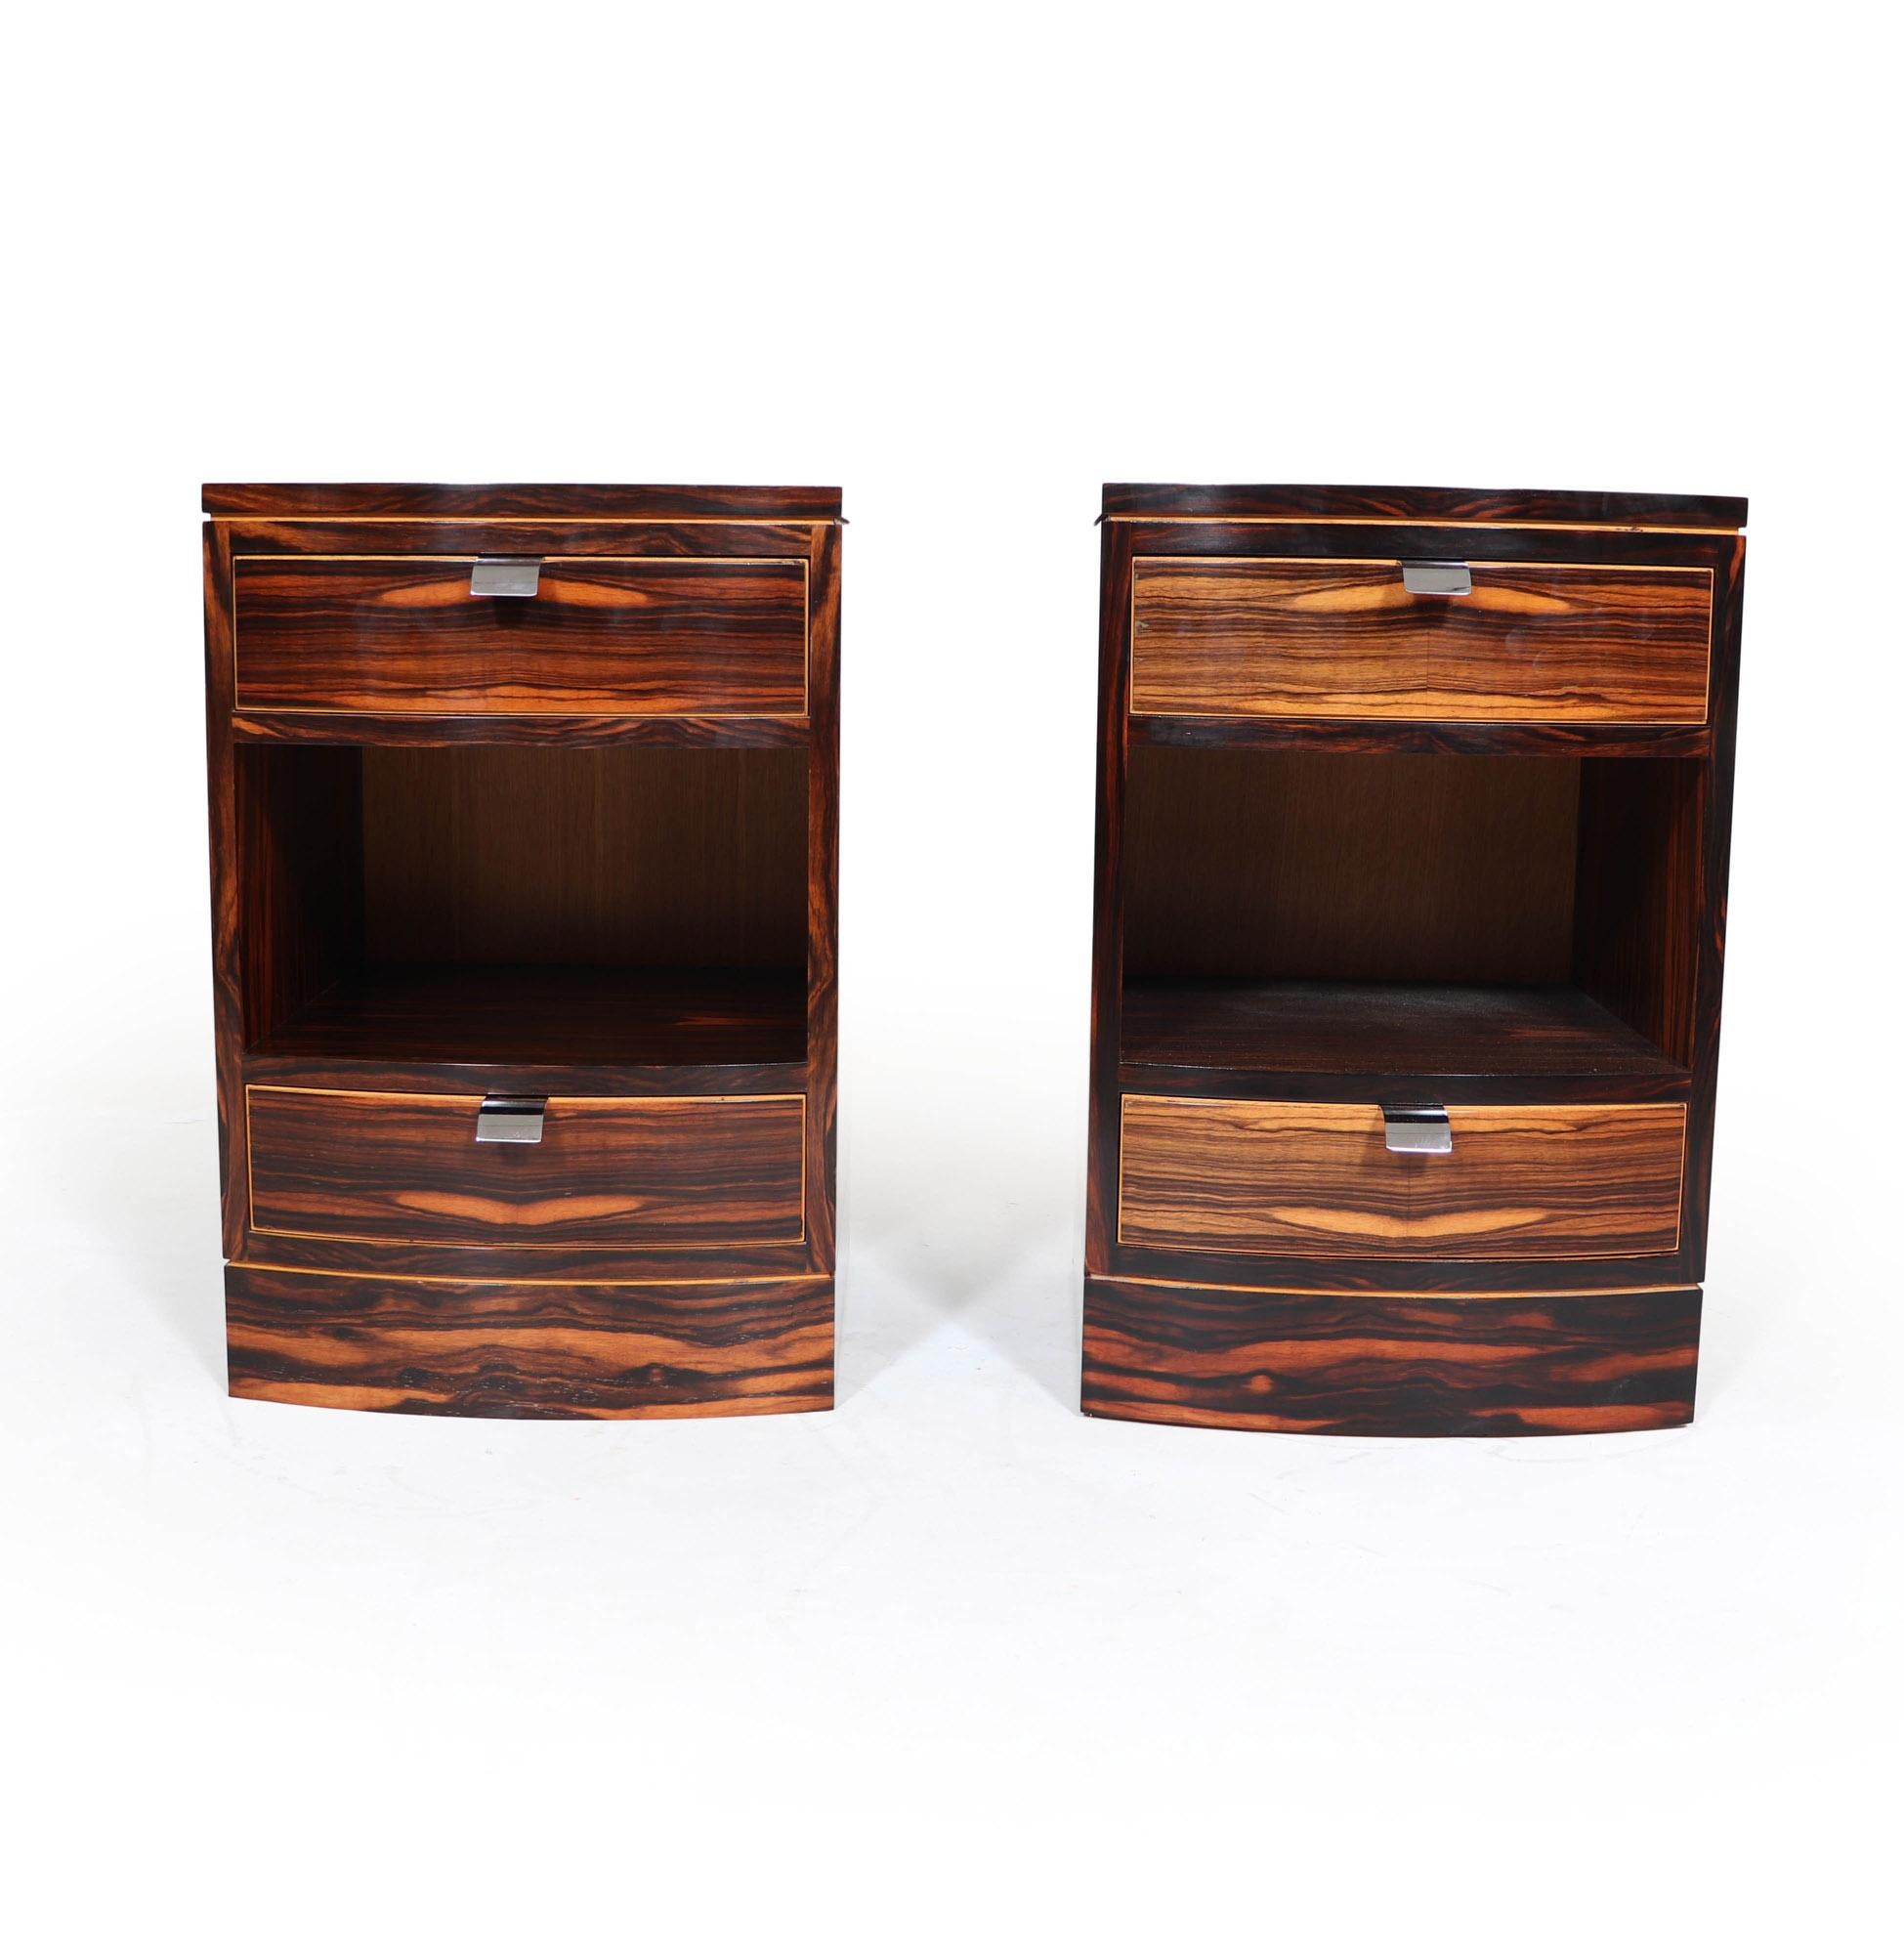 French Pair of Art Deco Style Bedside Chest in Macassar Ebony